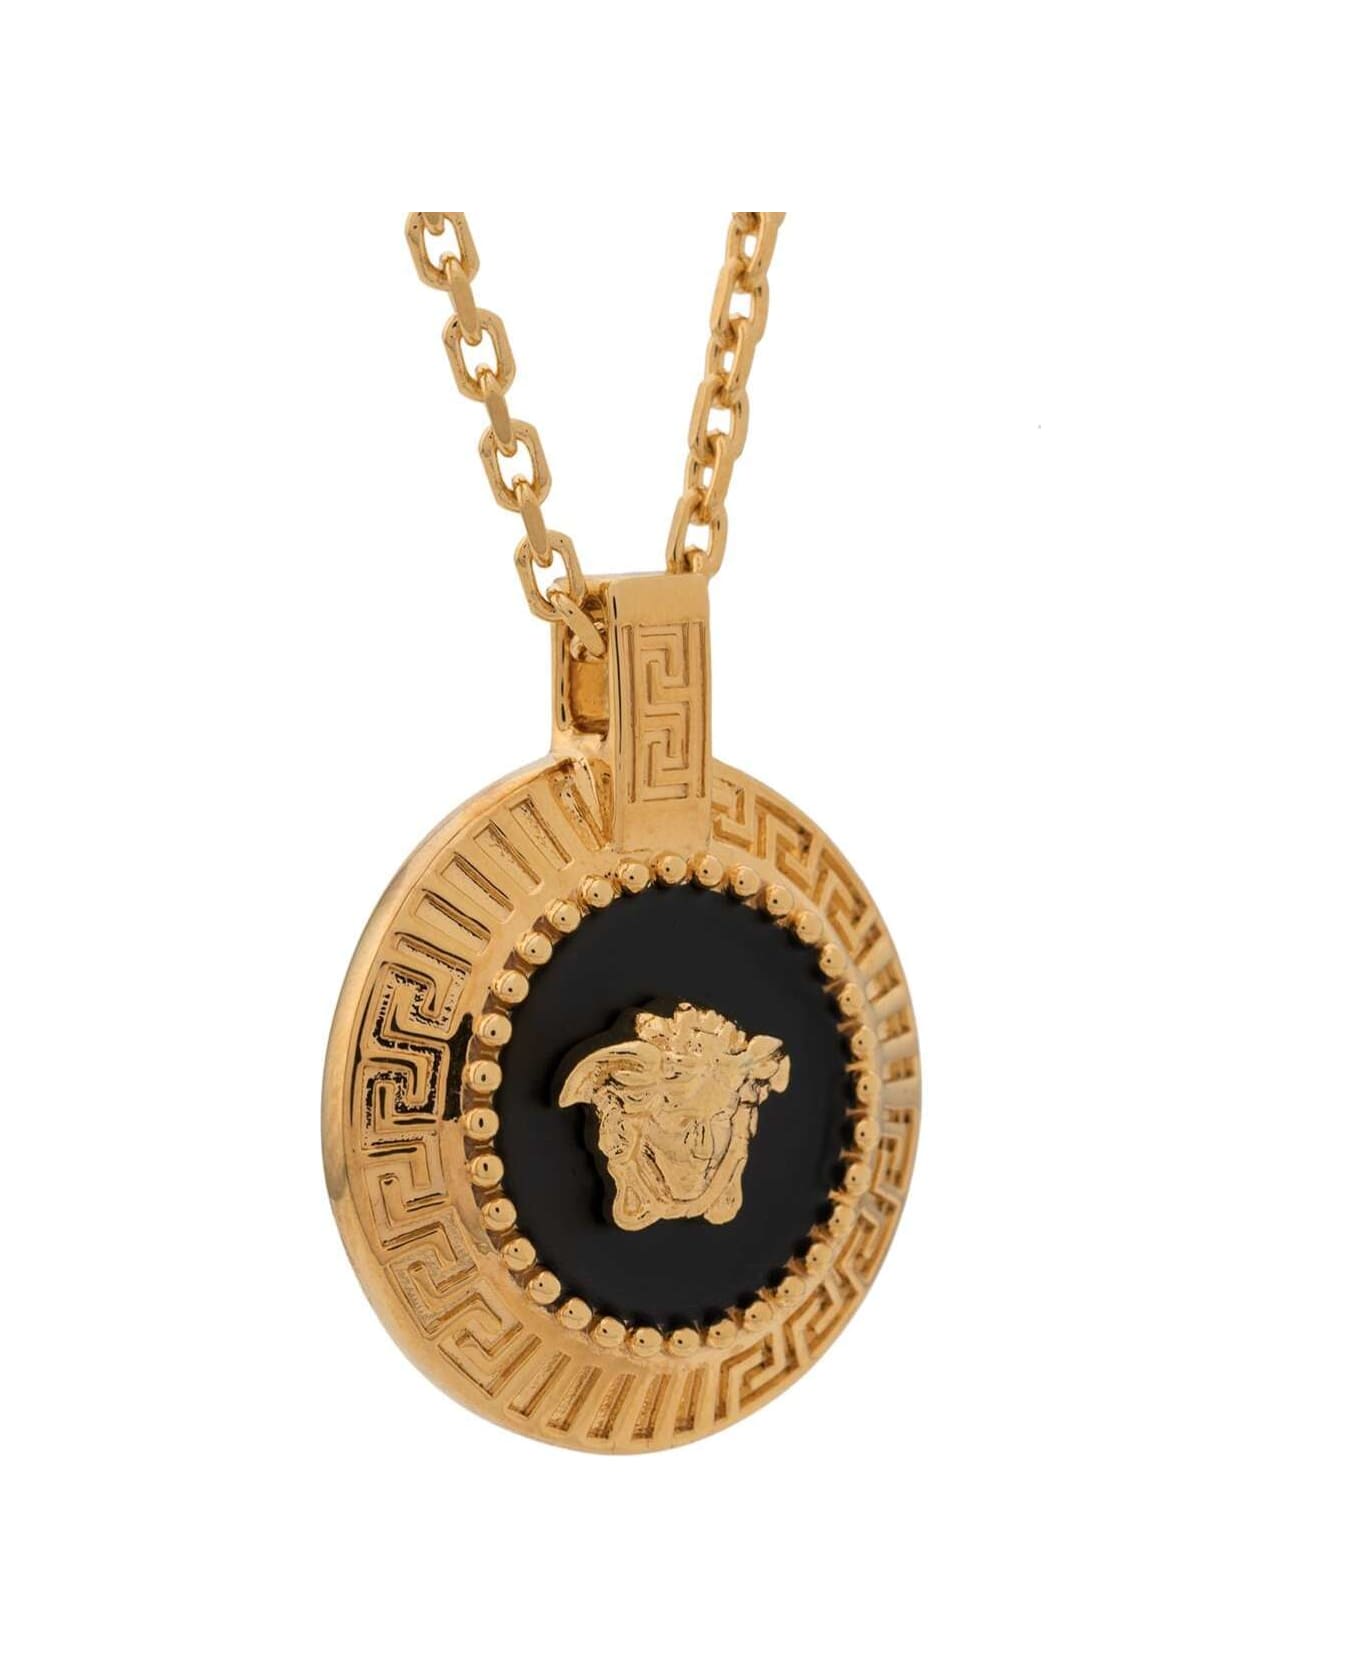 Versace Man's Metal Necklace With Enameled Medusa Pendant - GOLD